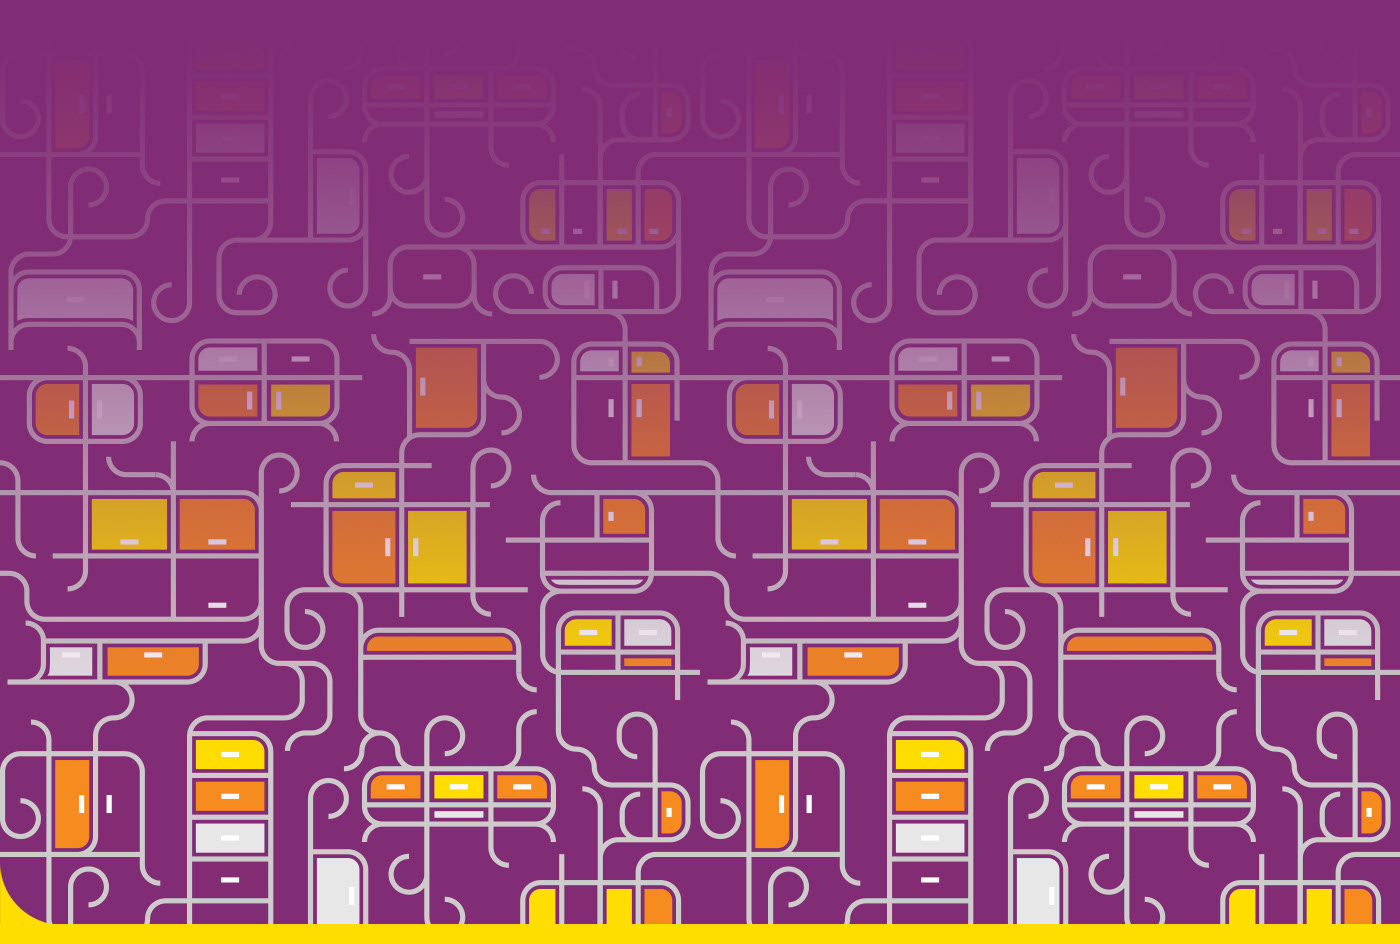 Abstract illustration of connected orange and yellow shapes on purple background.